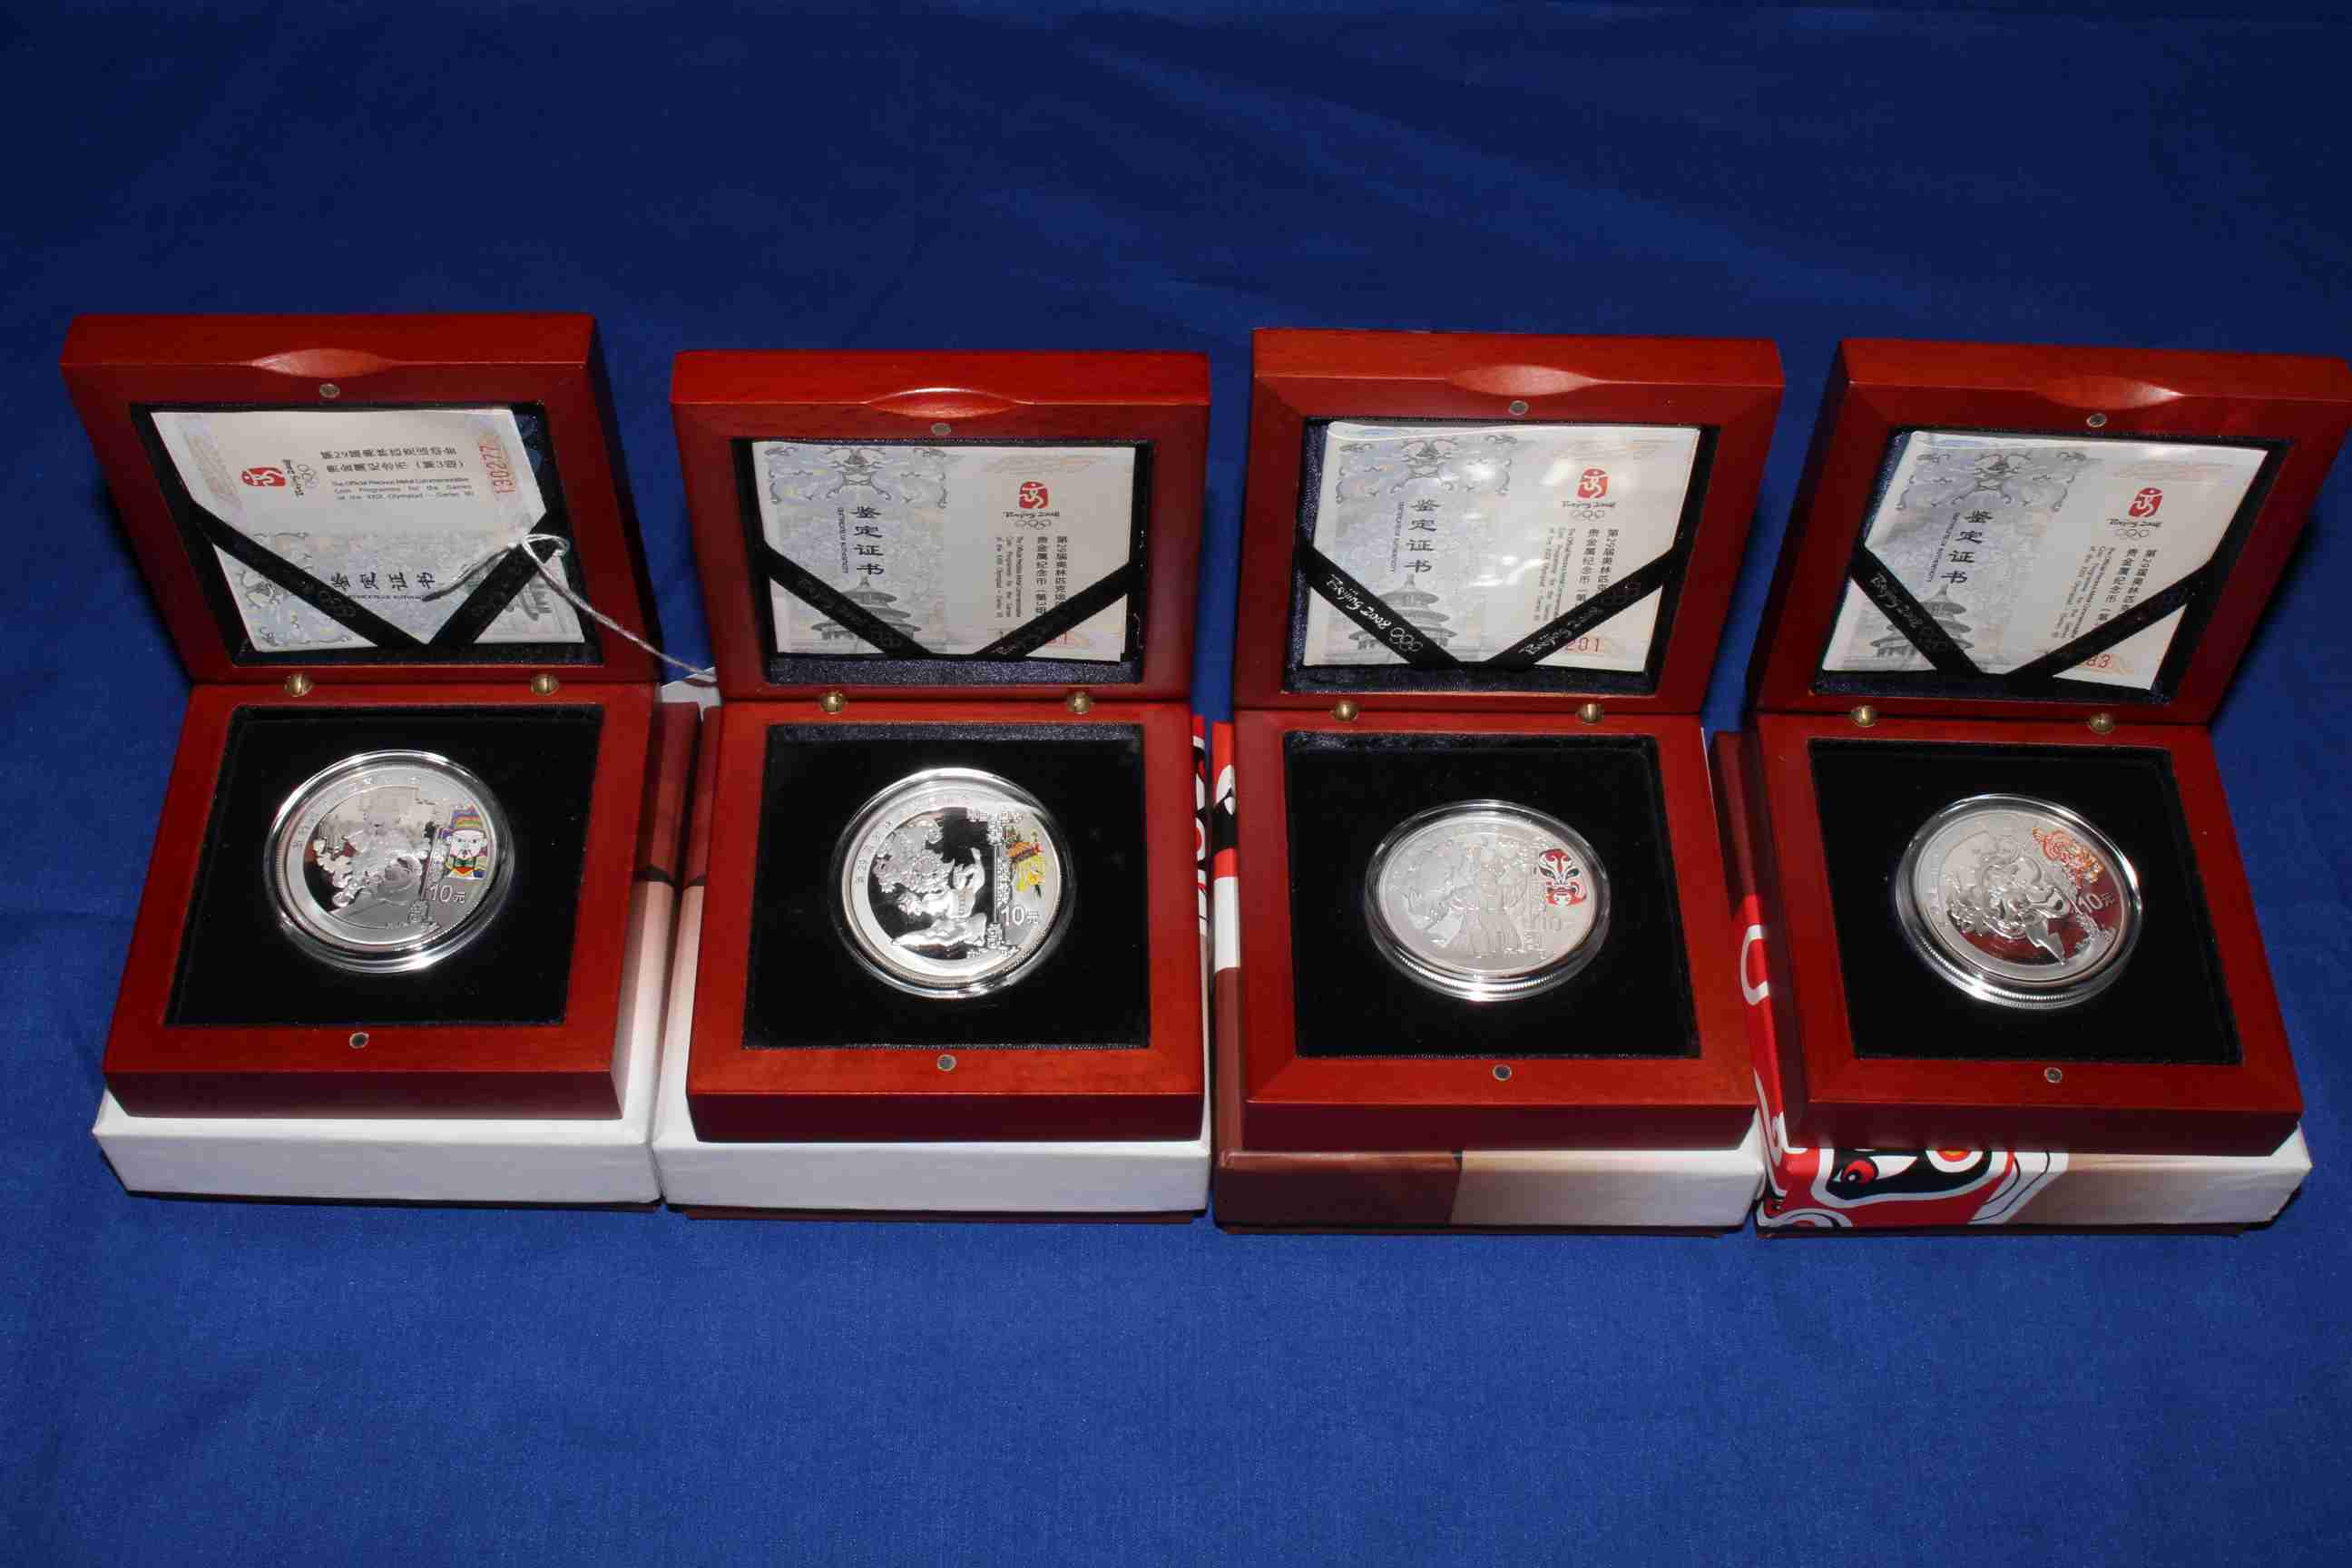 People's Bank of China Beijing 2008 Official Commemorative silver coins for the Games of the XXIX